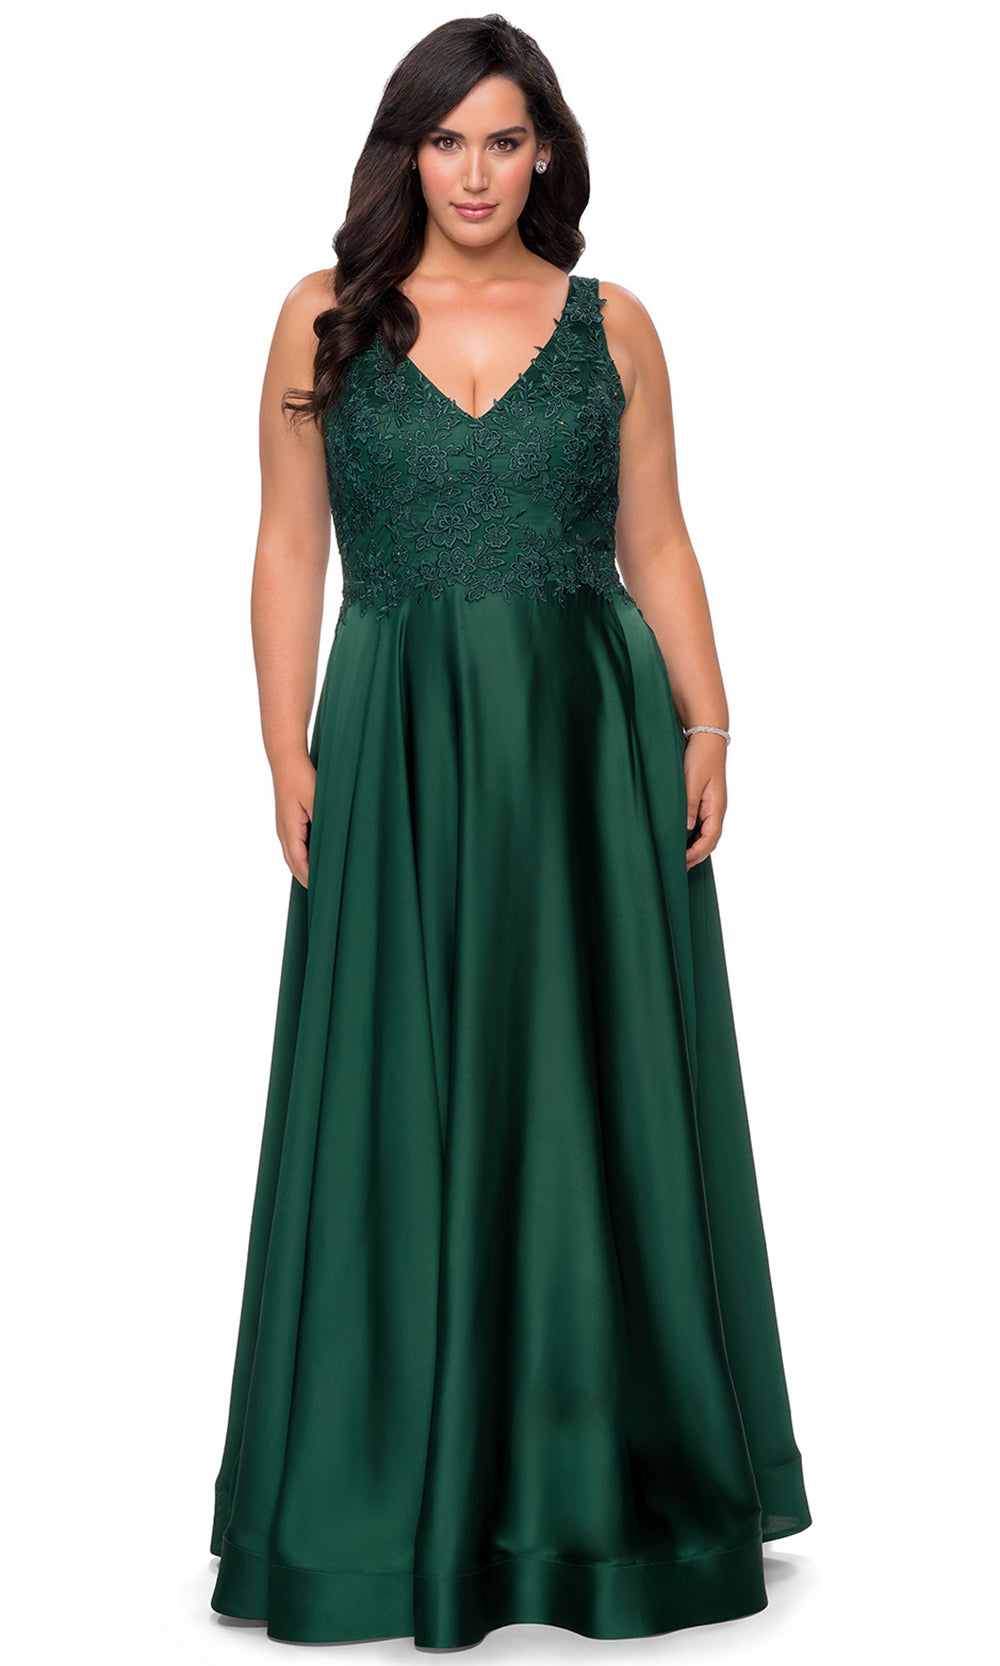 La Femme - 29039 Beaded Lace Satin A-Line Gown In Green